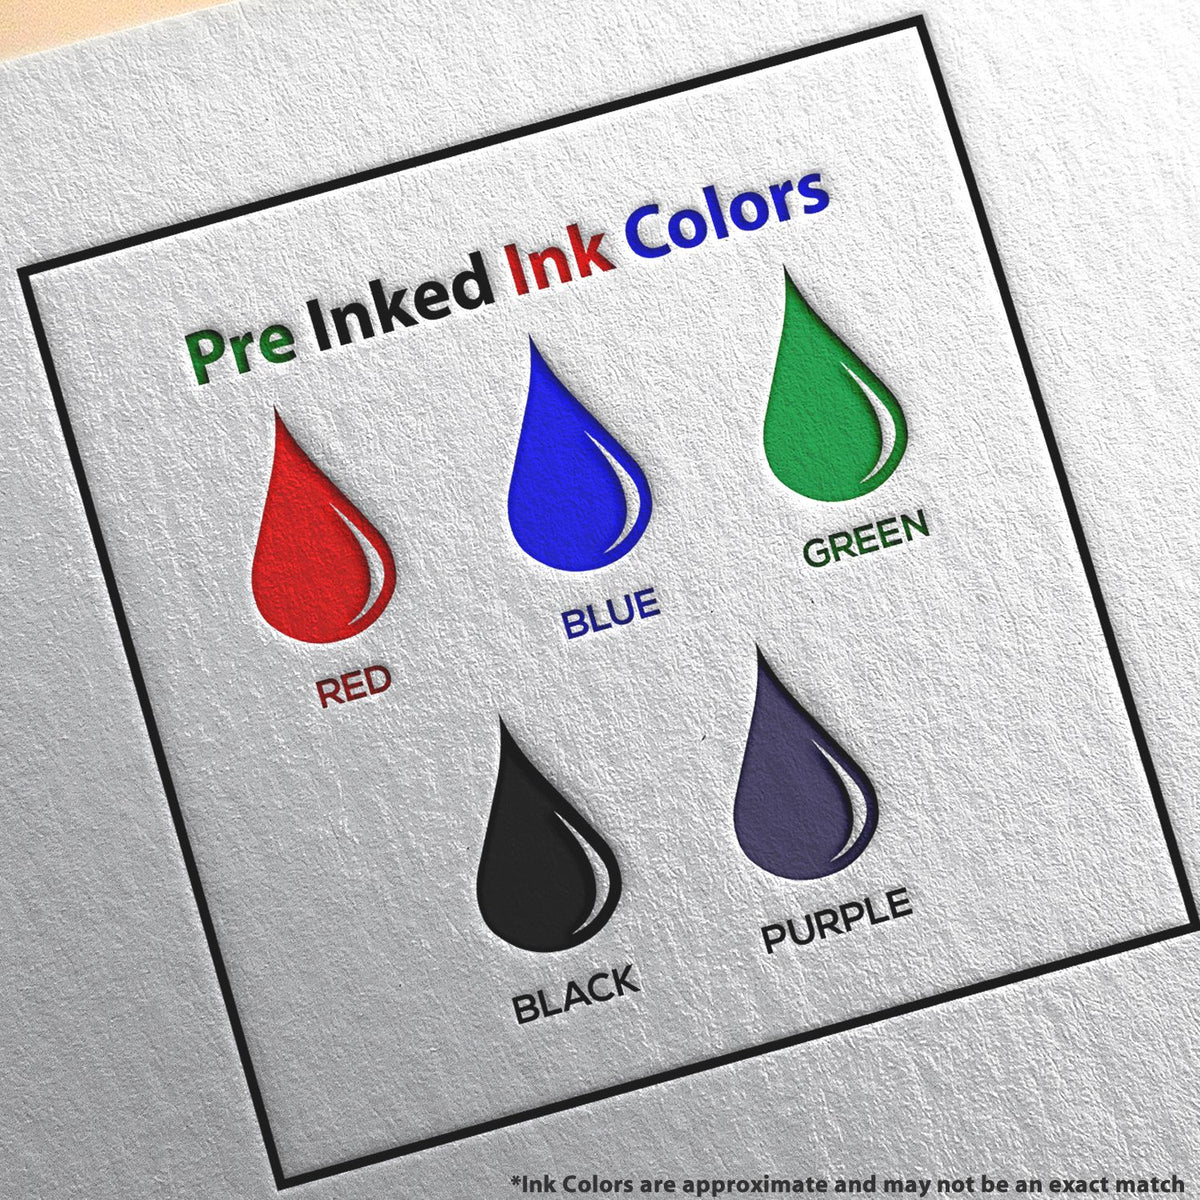 A picture showing the different ink colors or hues available for the Slim Pre-Inked Mississippi Land Surveyor Seal Stamp product.